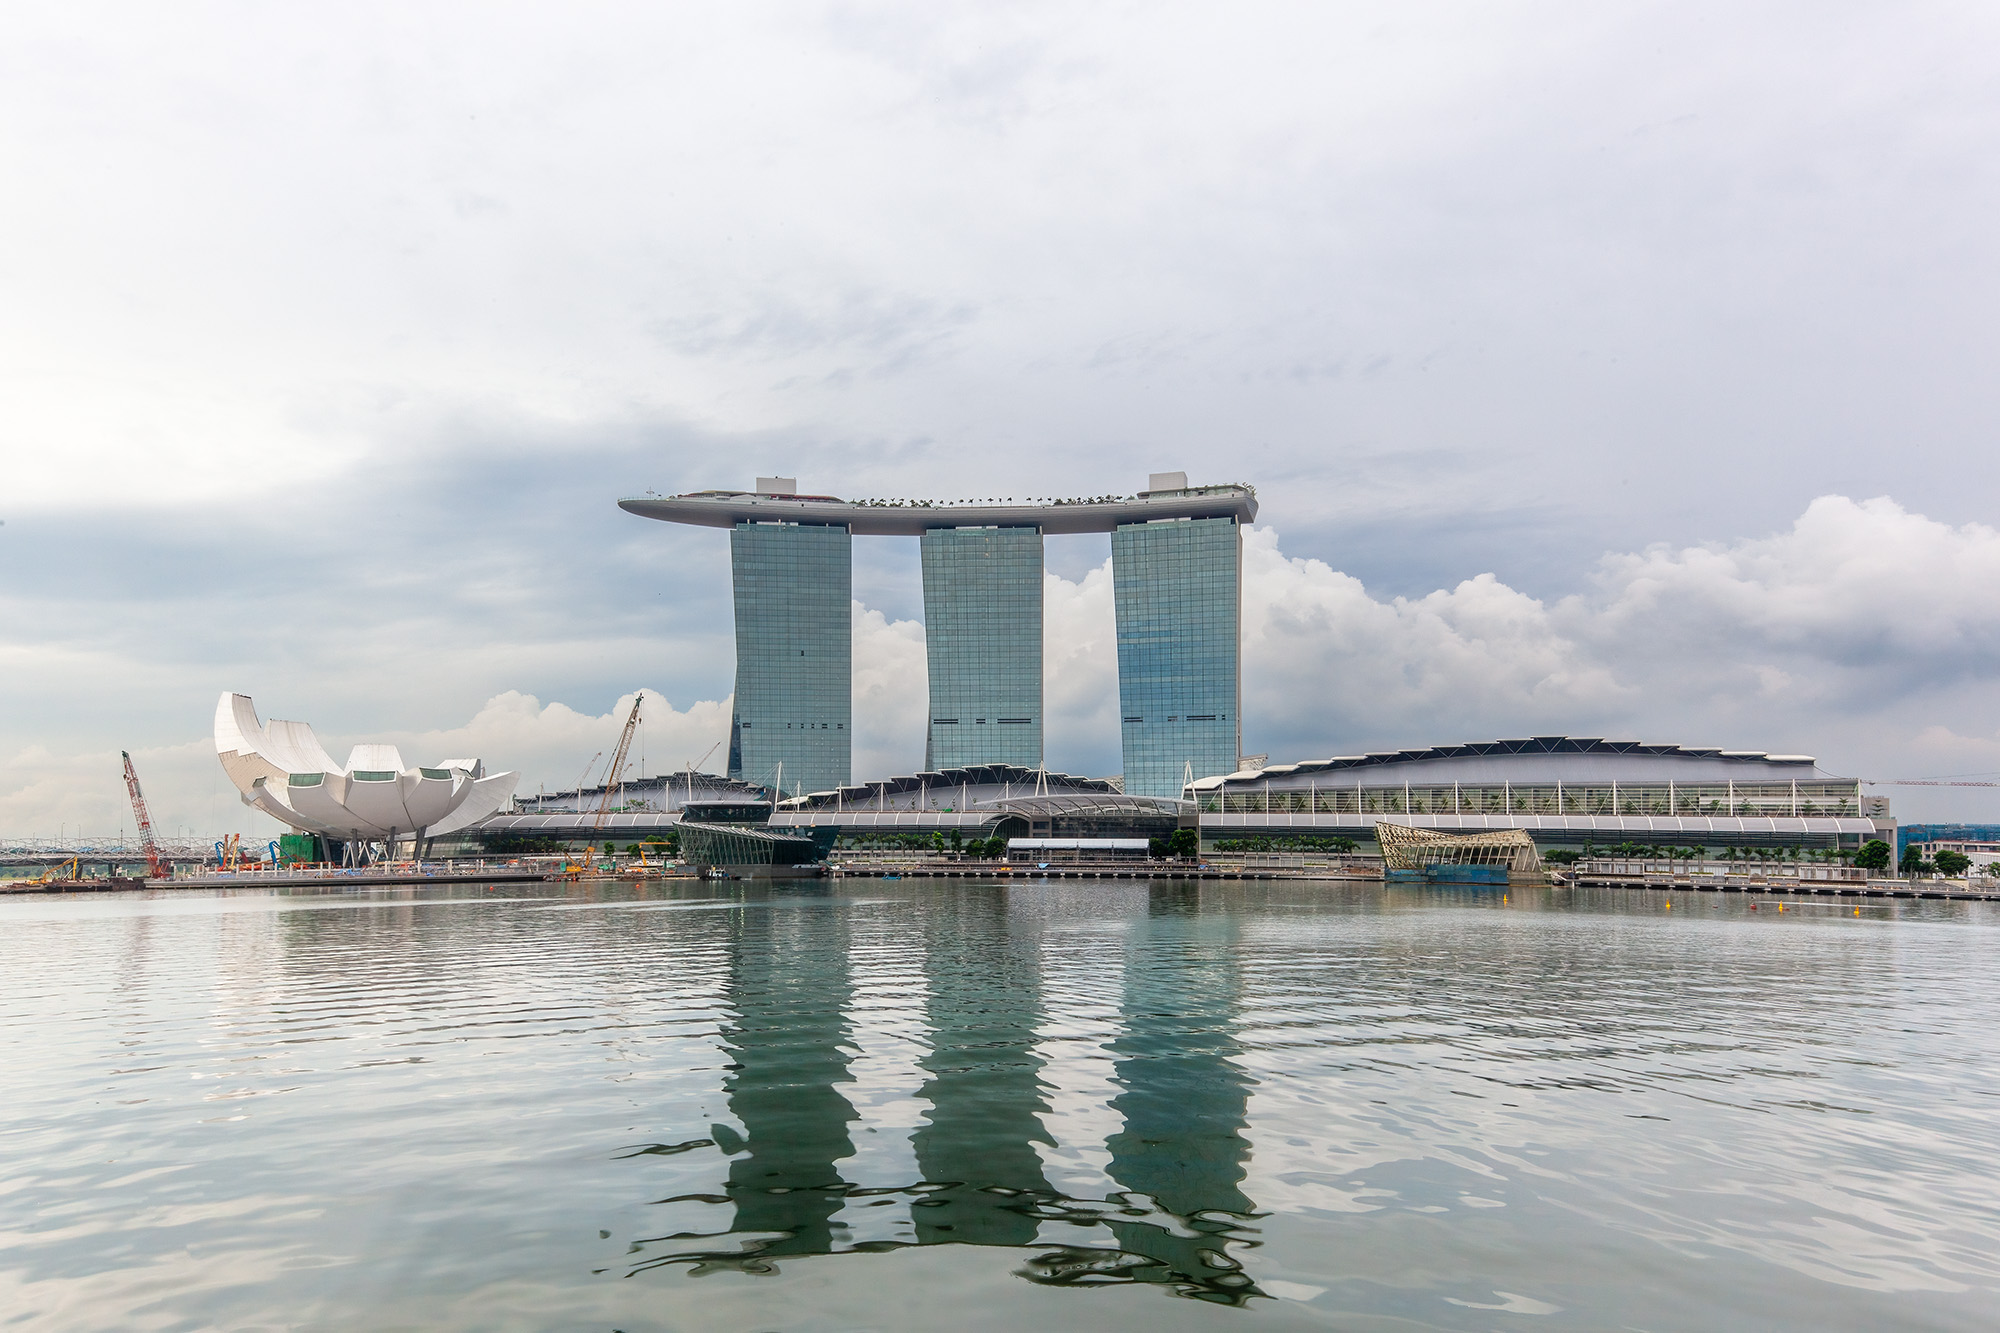 This image captures the iconic Marina Bay Sands Hotel and Casino on a cloudy day, as viewed from the harbor. The reflection of...